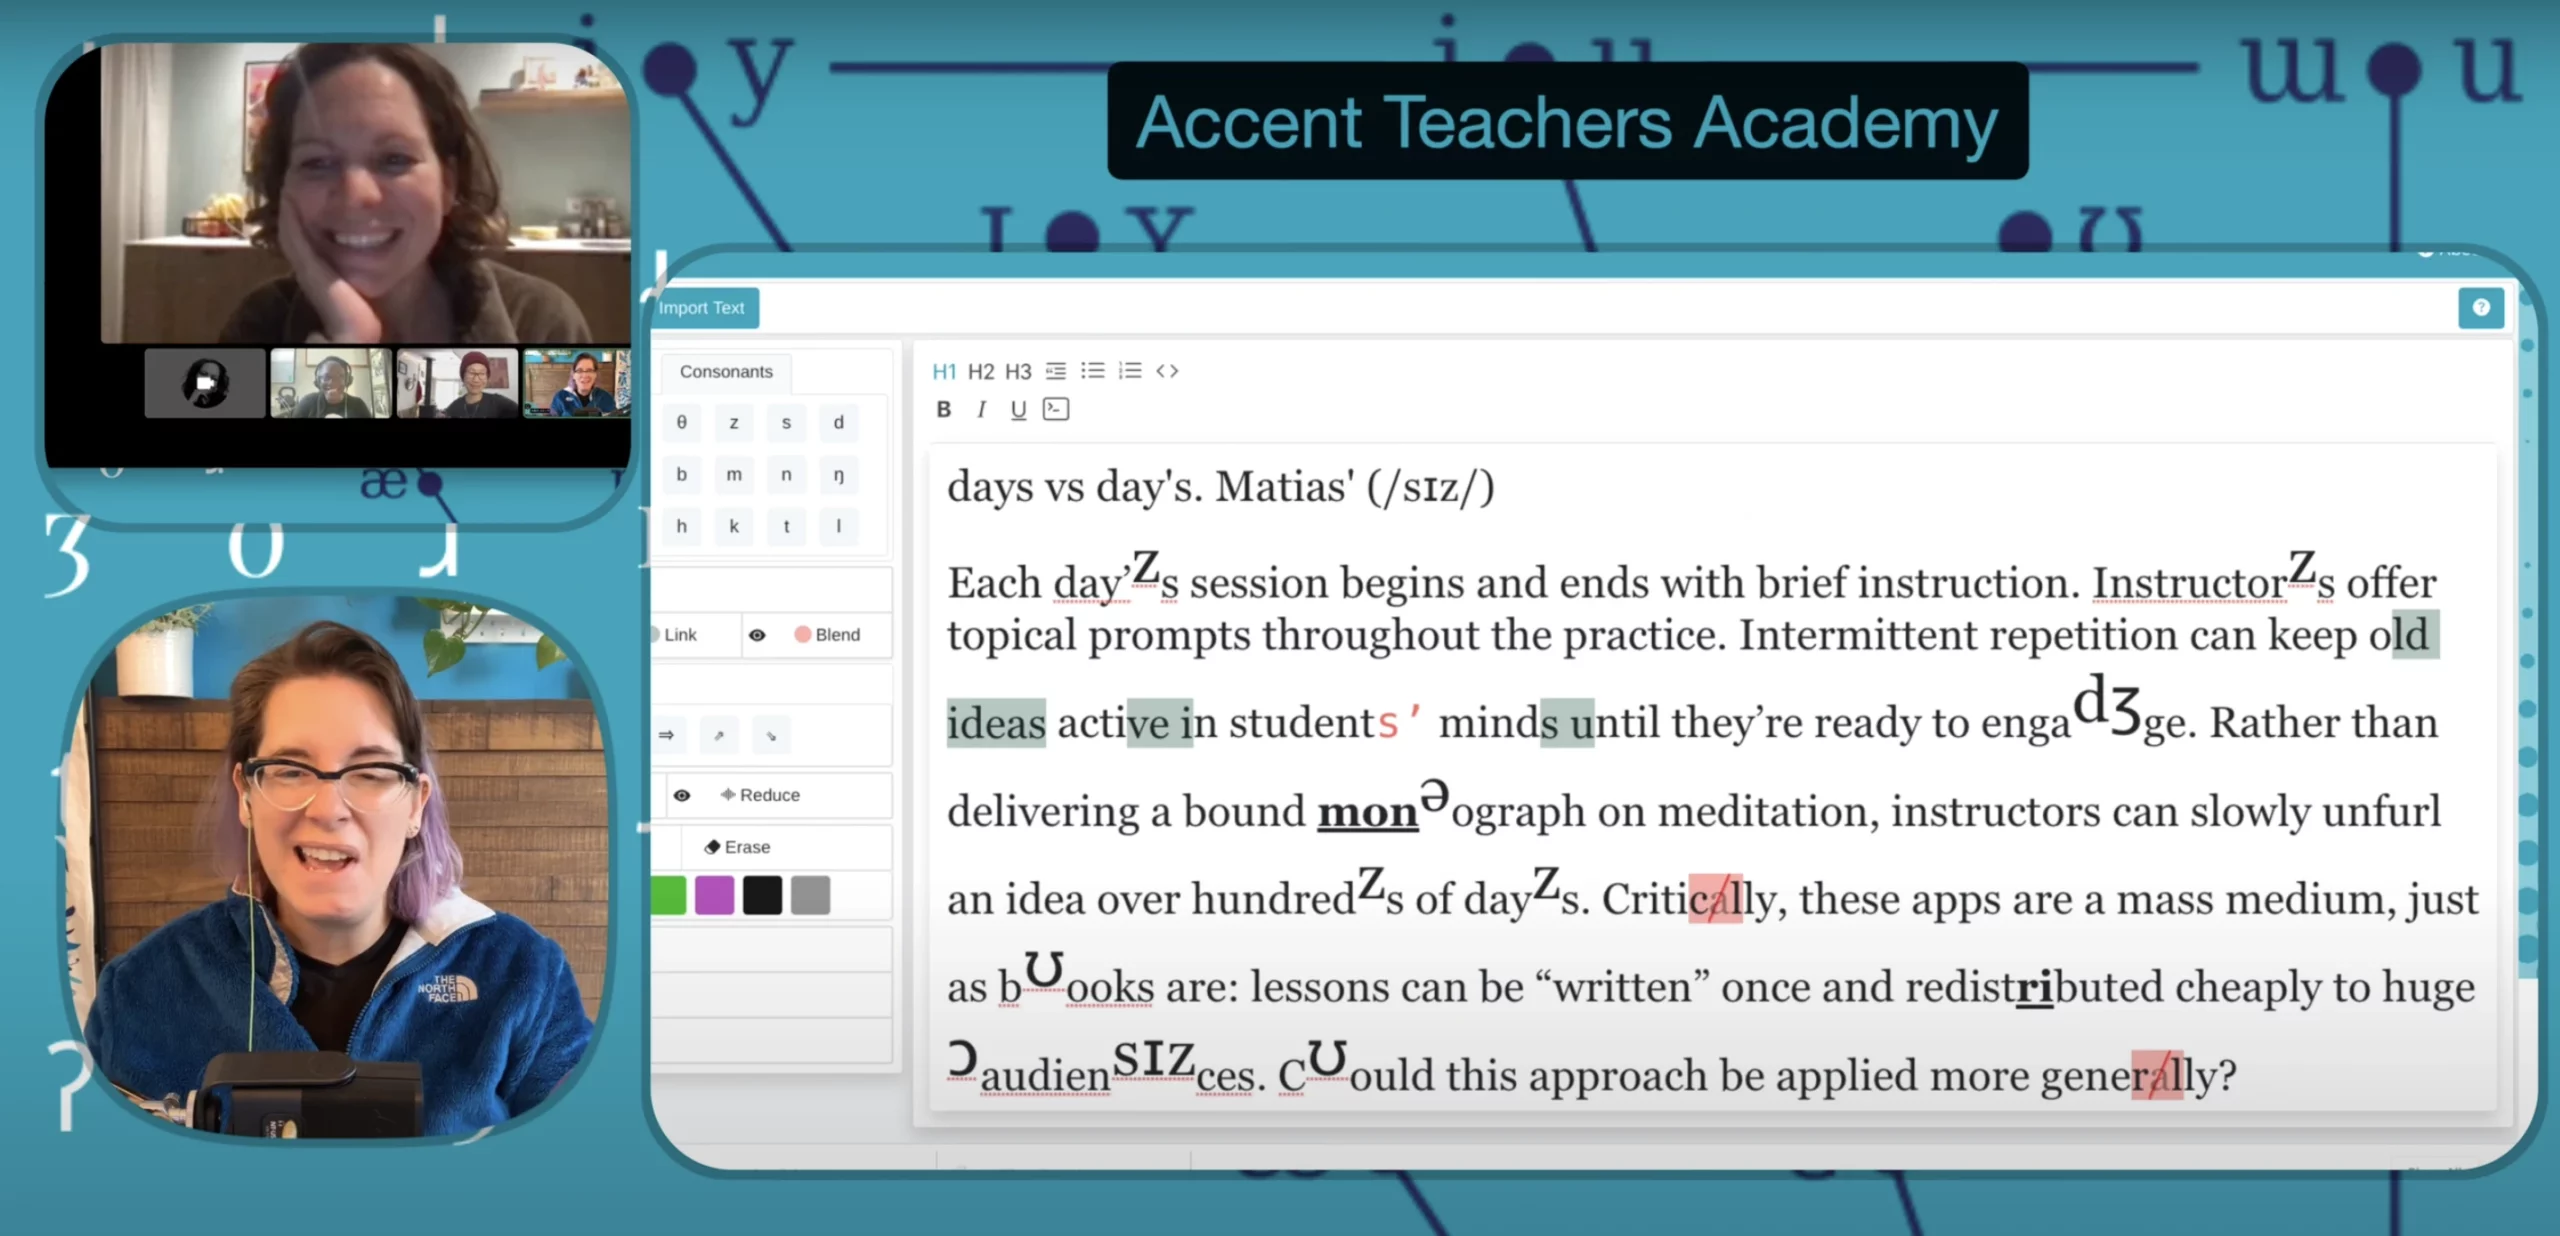 Learn accent teaching techniques in the Accent Teachers Academy